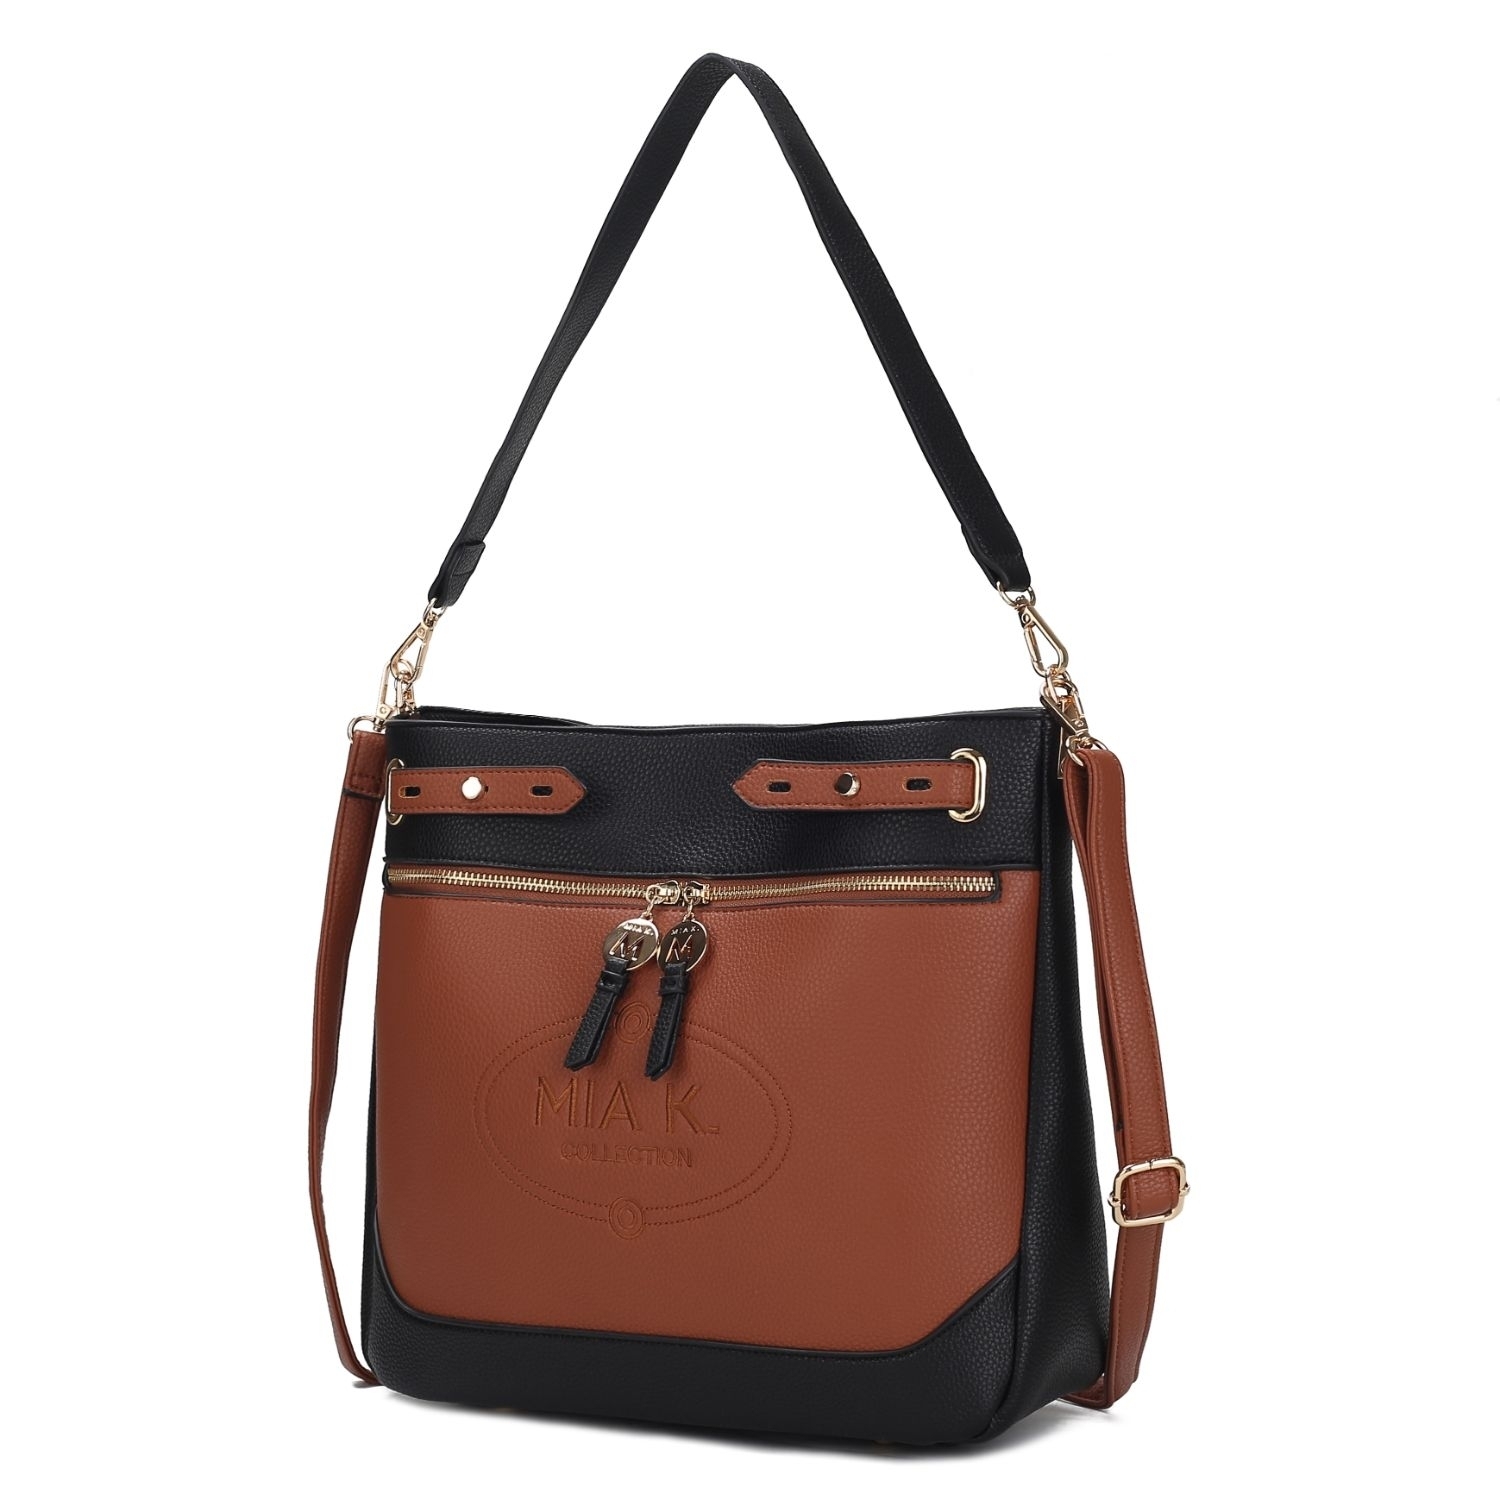 MKF Collection Evie Two-tone Vegan Leather Women's Shoulder Bag By Mia K. - Chocolate-beige